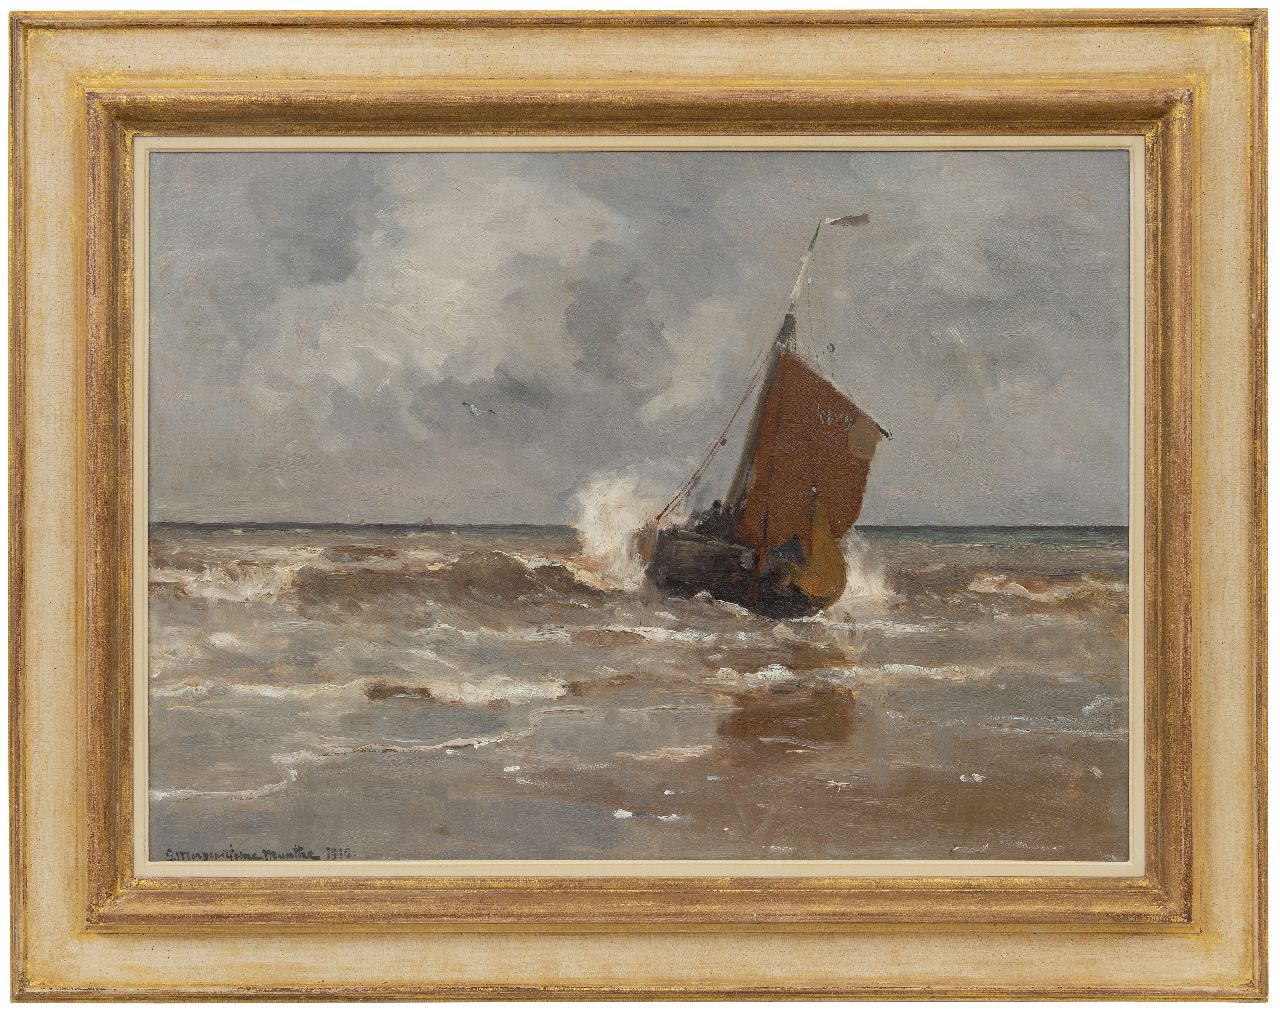 Munthe G.A.L.  | Gerhard Arij Ludwig 'Morgenstjerne' Munthe, A fishing barge approaching the beach, Katwijk, oil on canvas 58.0 x 78.1 cm, signed l.l. and dated 1910